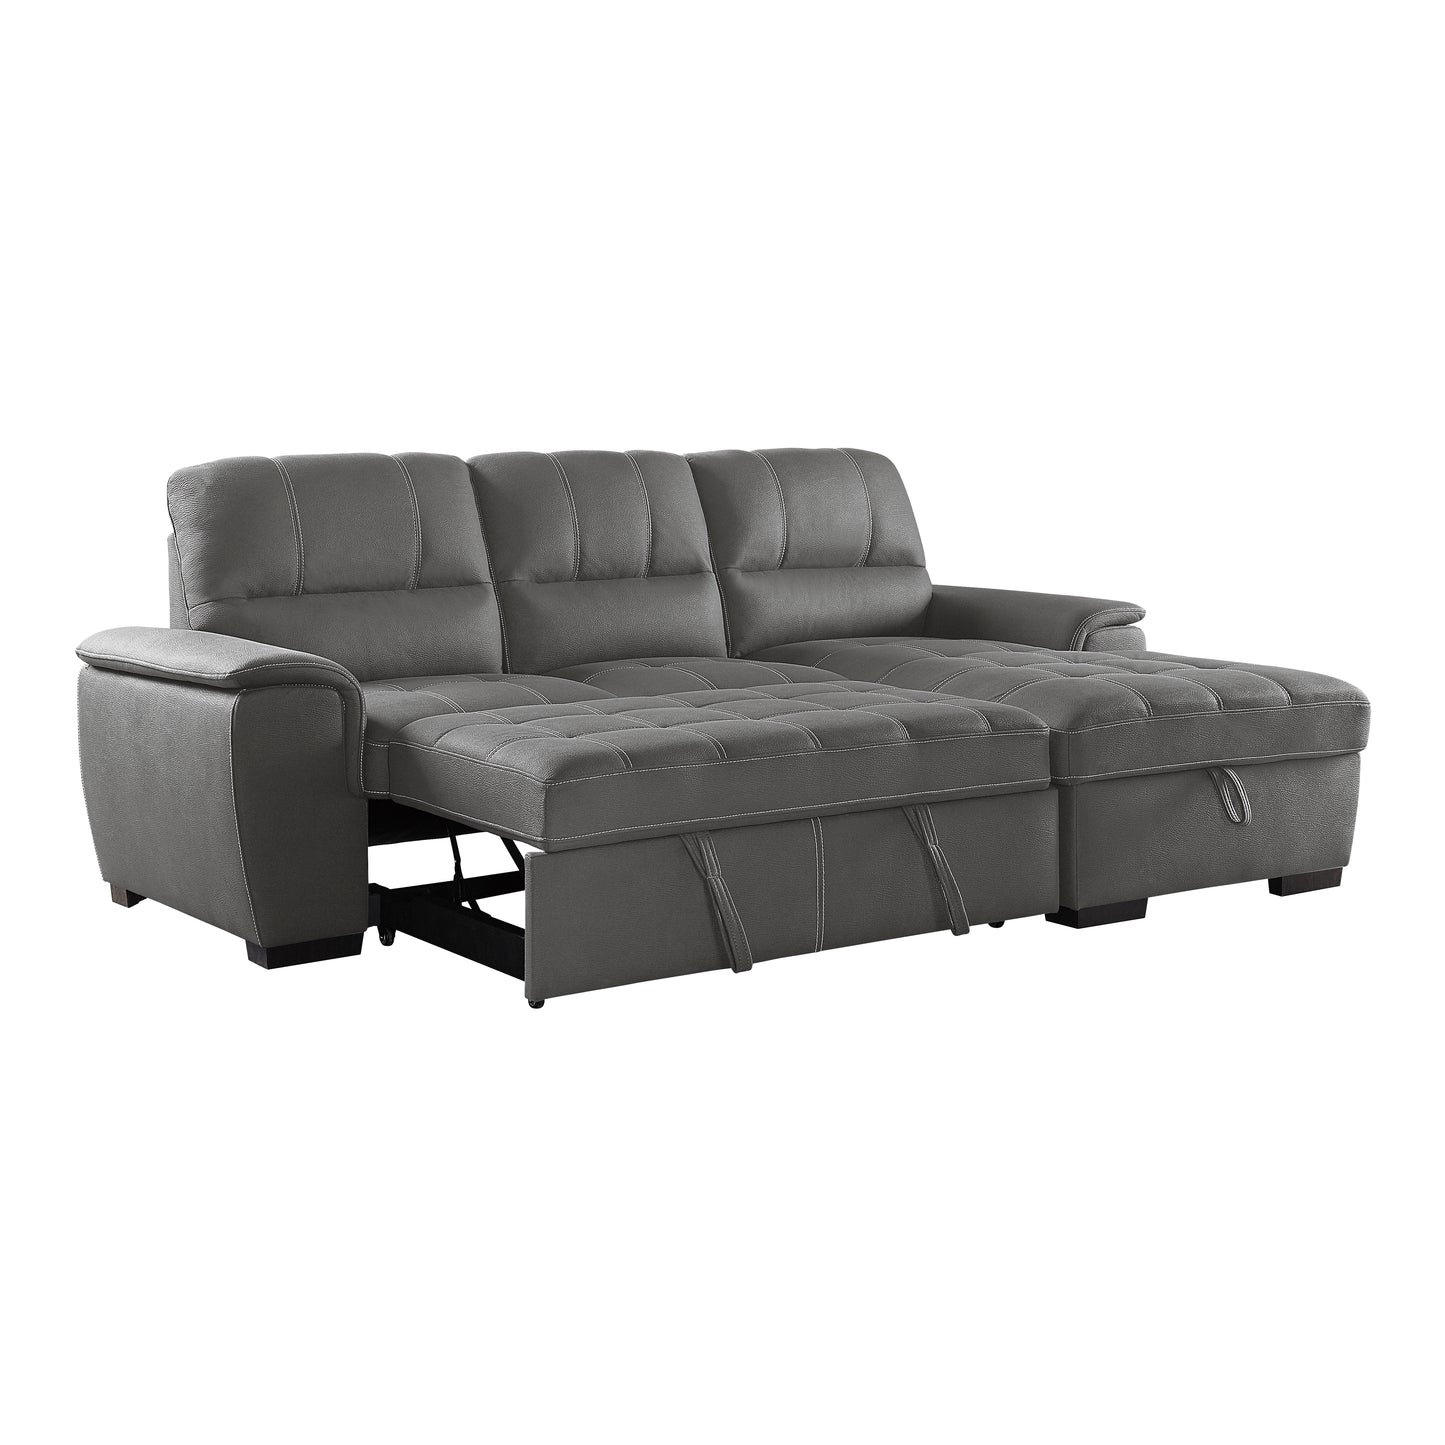 Andes 2-Pcs Sectional w/ Pull-out Bed & RAF ONLY w/ Hidden Storage GREY